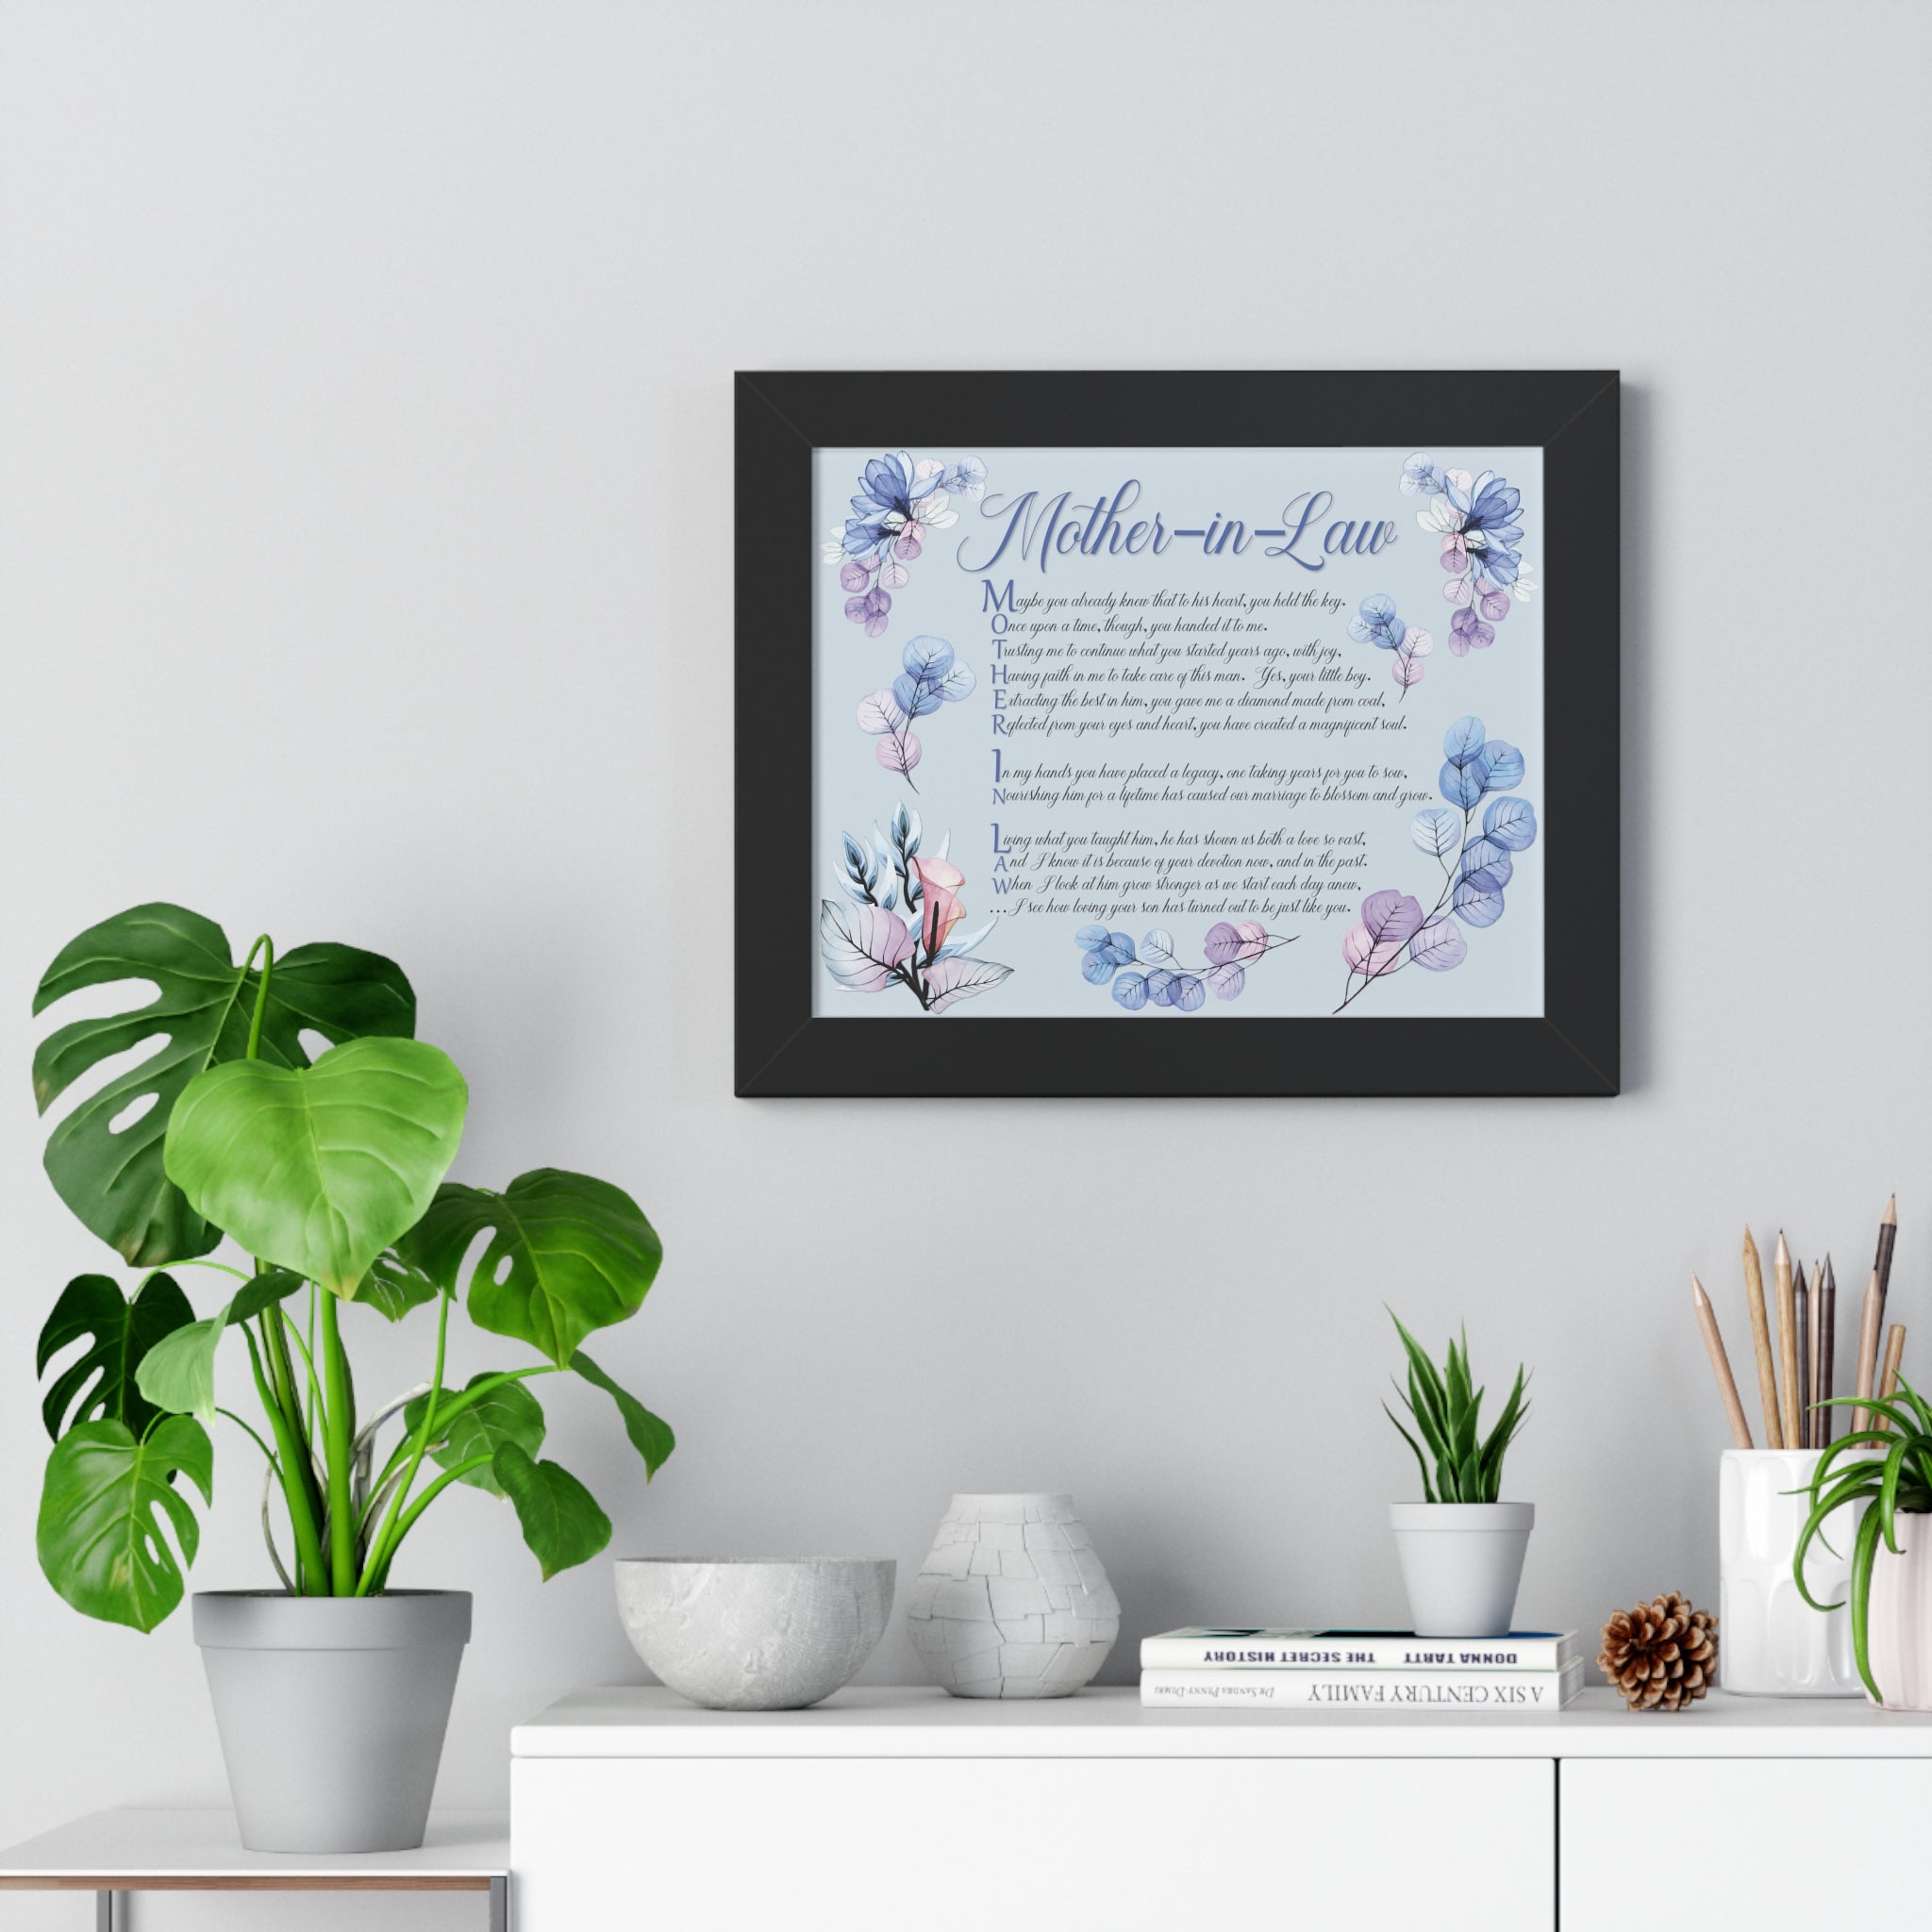 It's Just a Phrase Framed Acrostic Print Collection